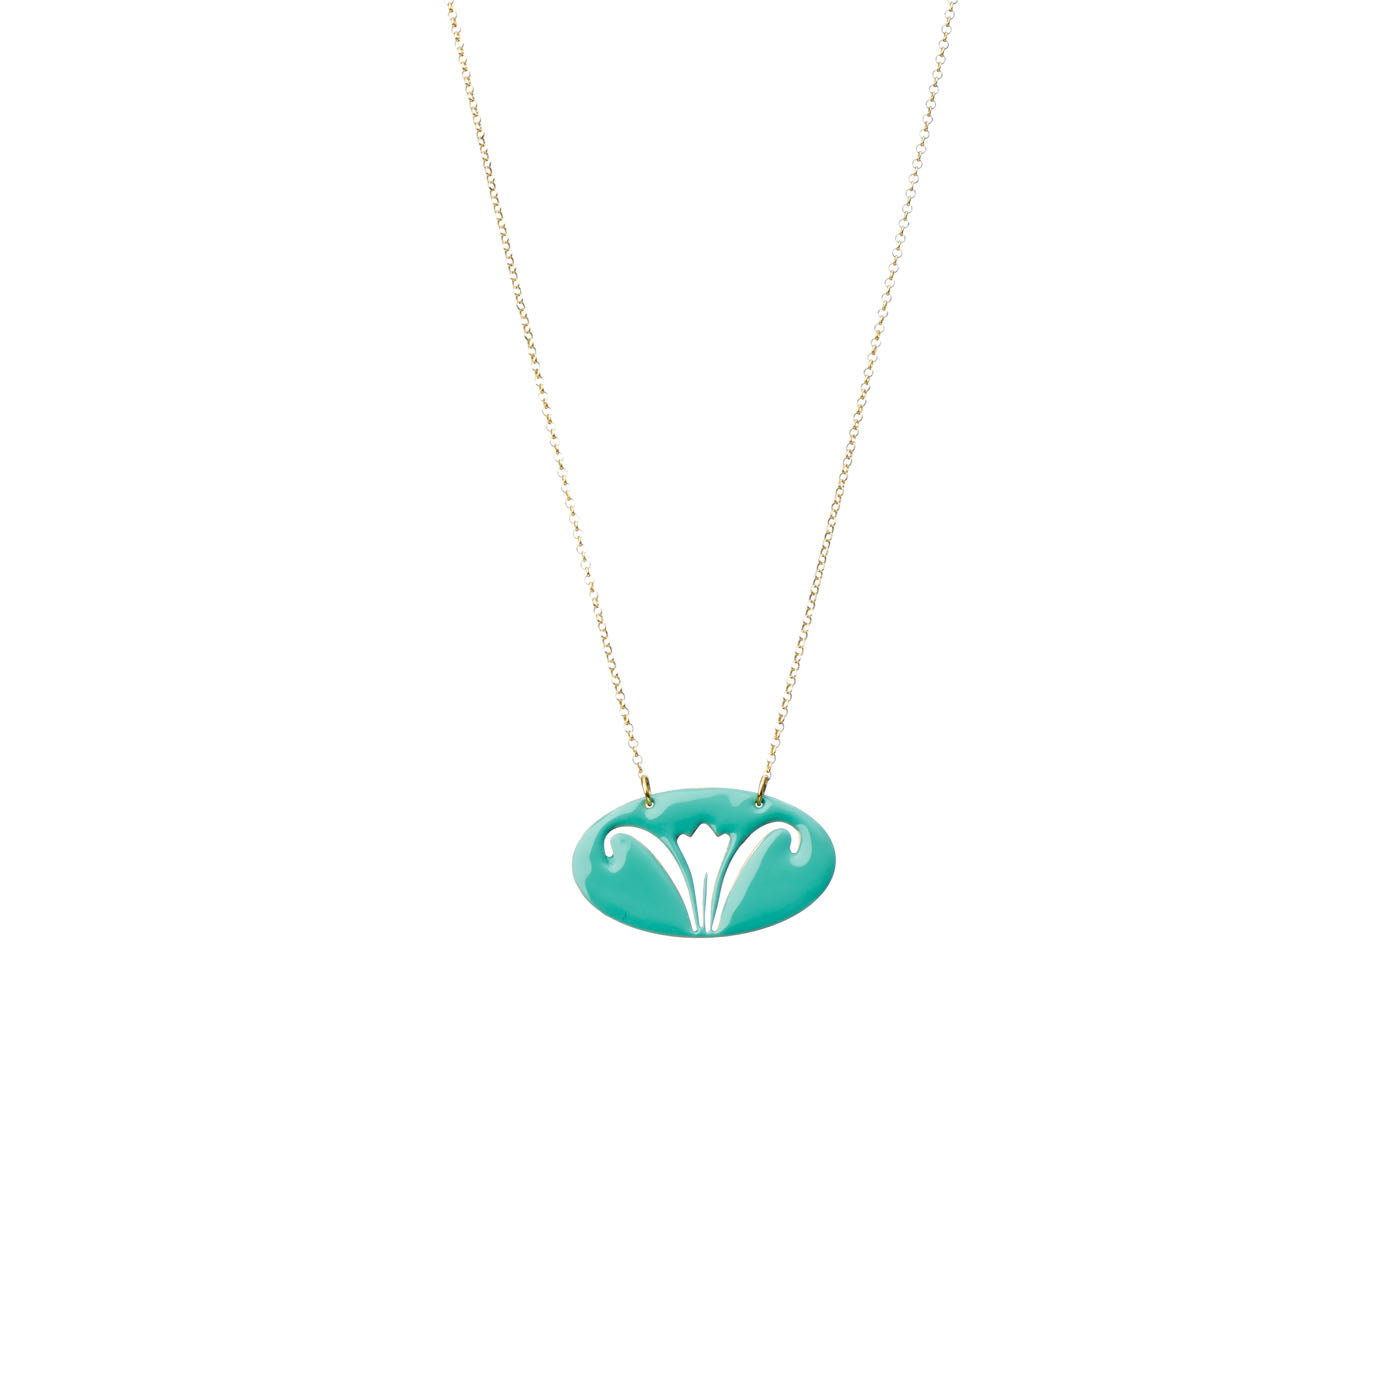 Lily - chain necklace with enamel - mint